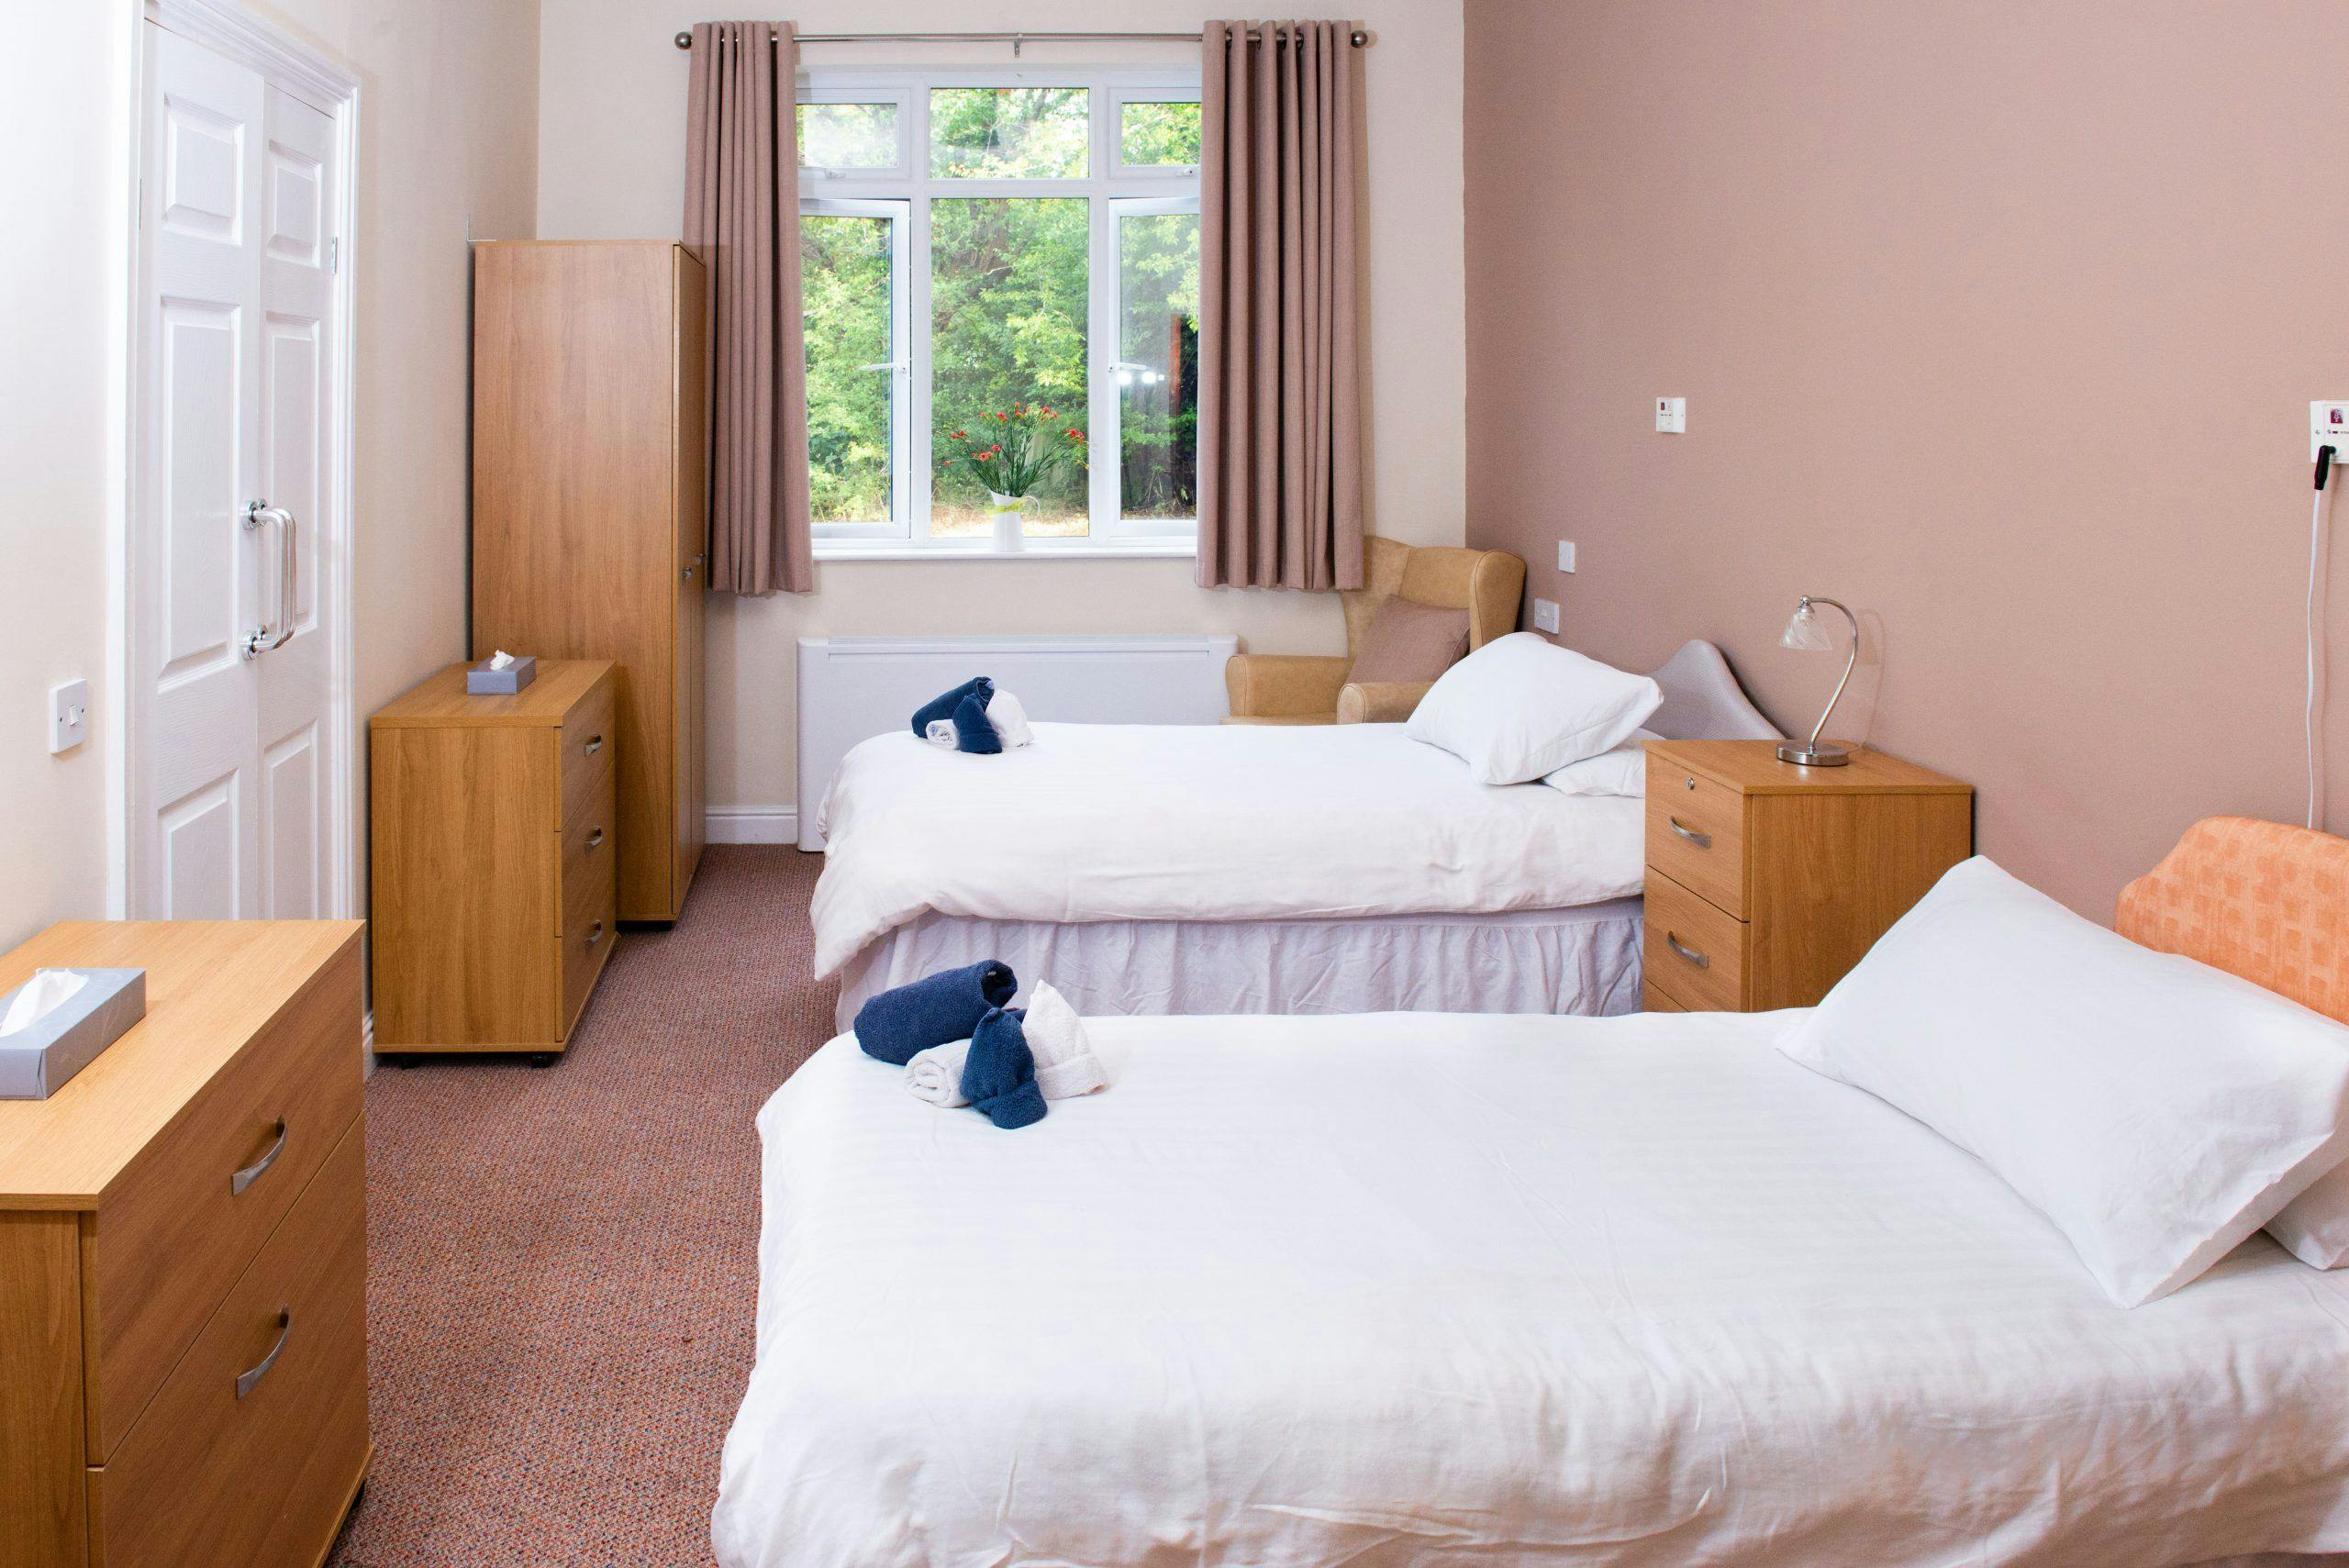 Bedroom of The Firs Care Home in Ripley, Derbyshire